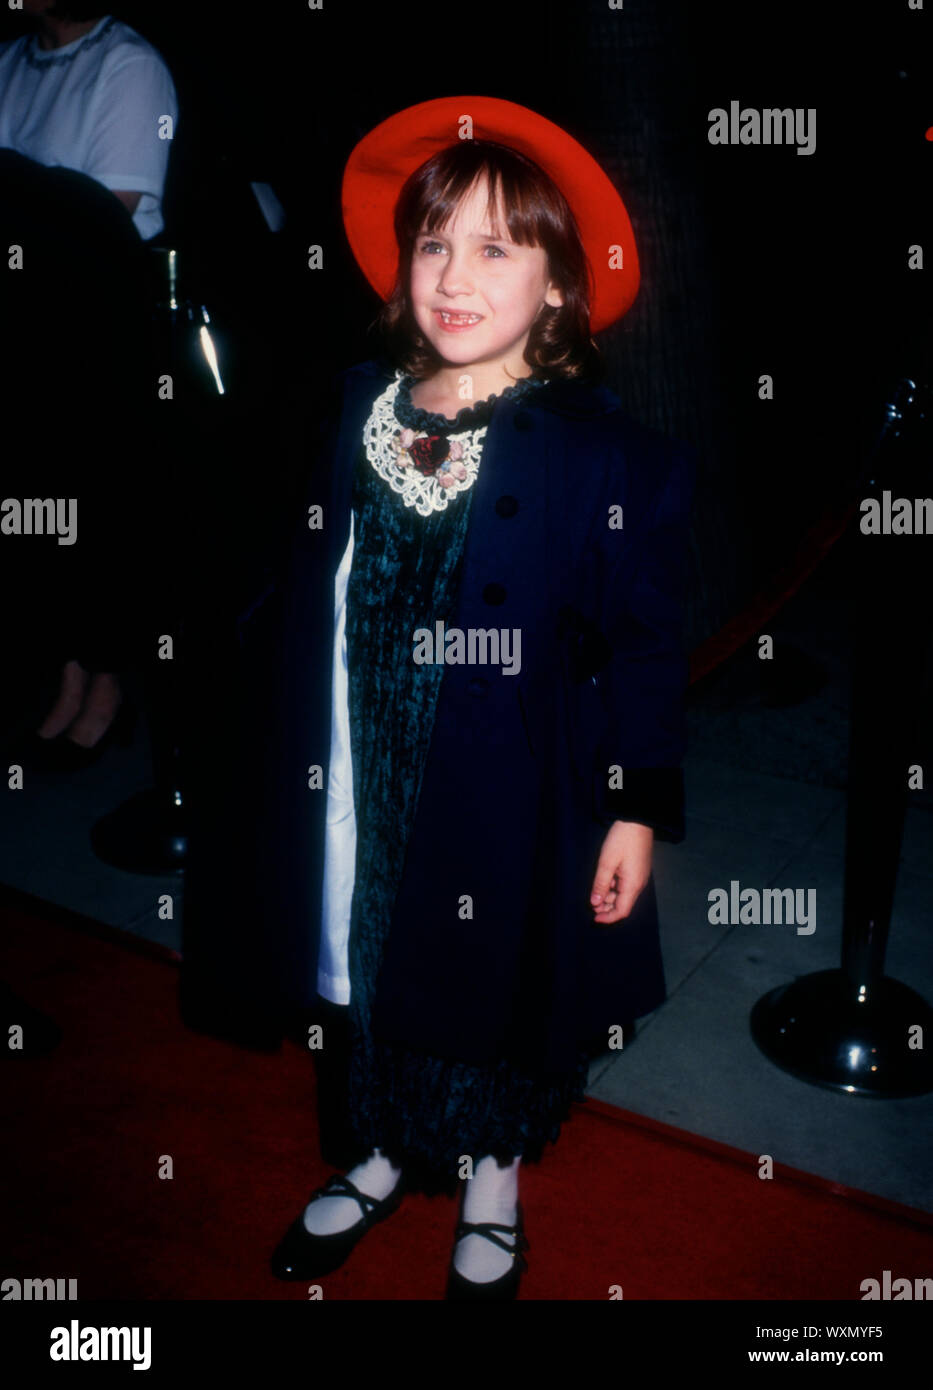 Beverly Hills, California, USA 13th December 1994 Actress Mara Wilson attends 20th Century Fox's 'Nell' Premiere on December 13, 1994 at Academy Theatre in Beverly Hills, California, USA. Photo by Barry King/Alamy Stock Photo Stock Photo